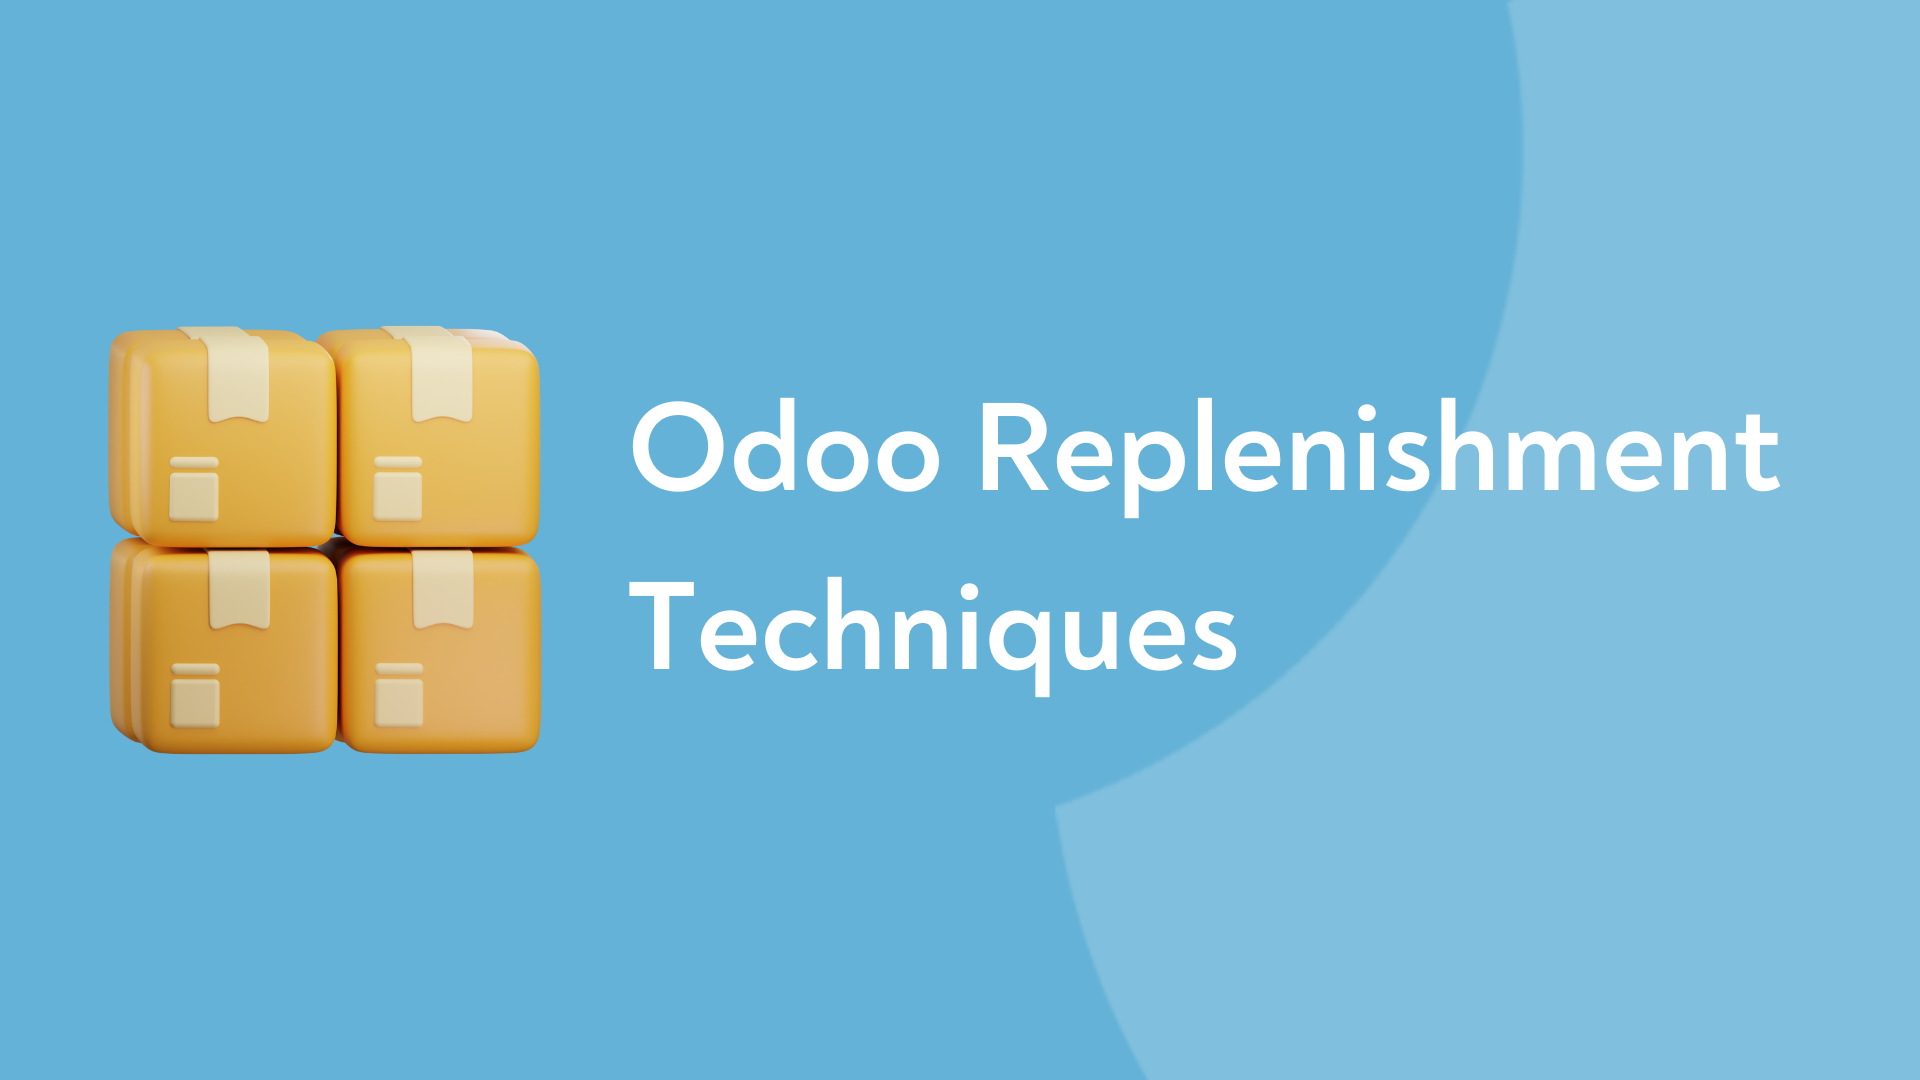 Enhancing Inventory Management with Odoo Replenishment Techniques